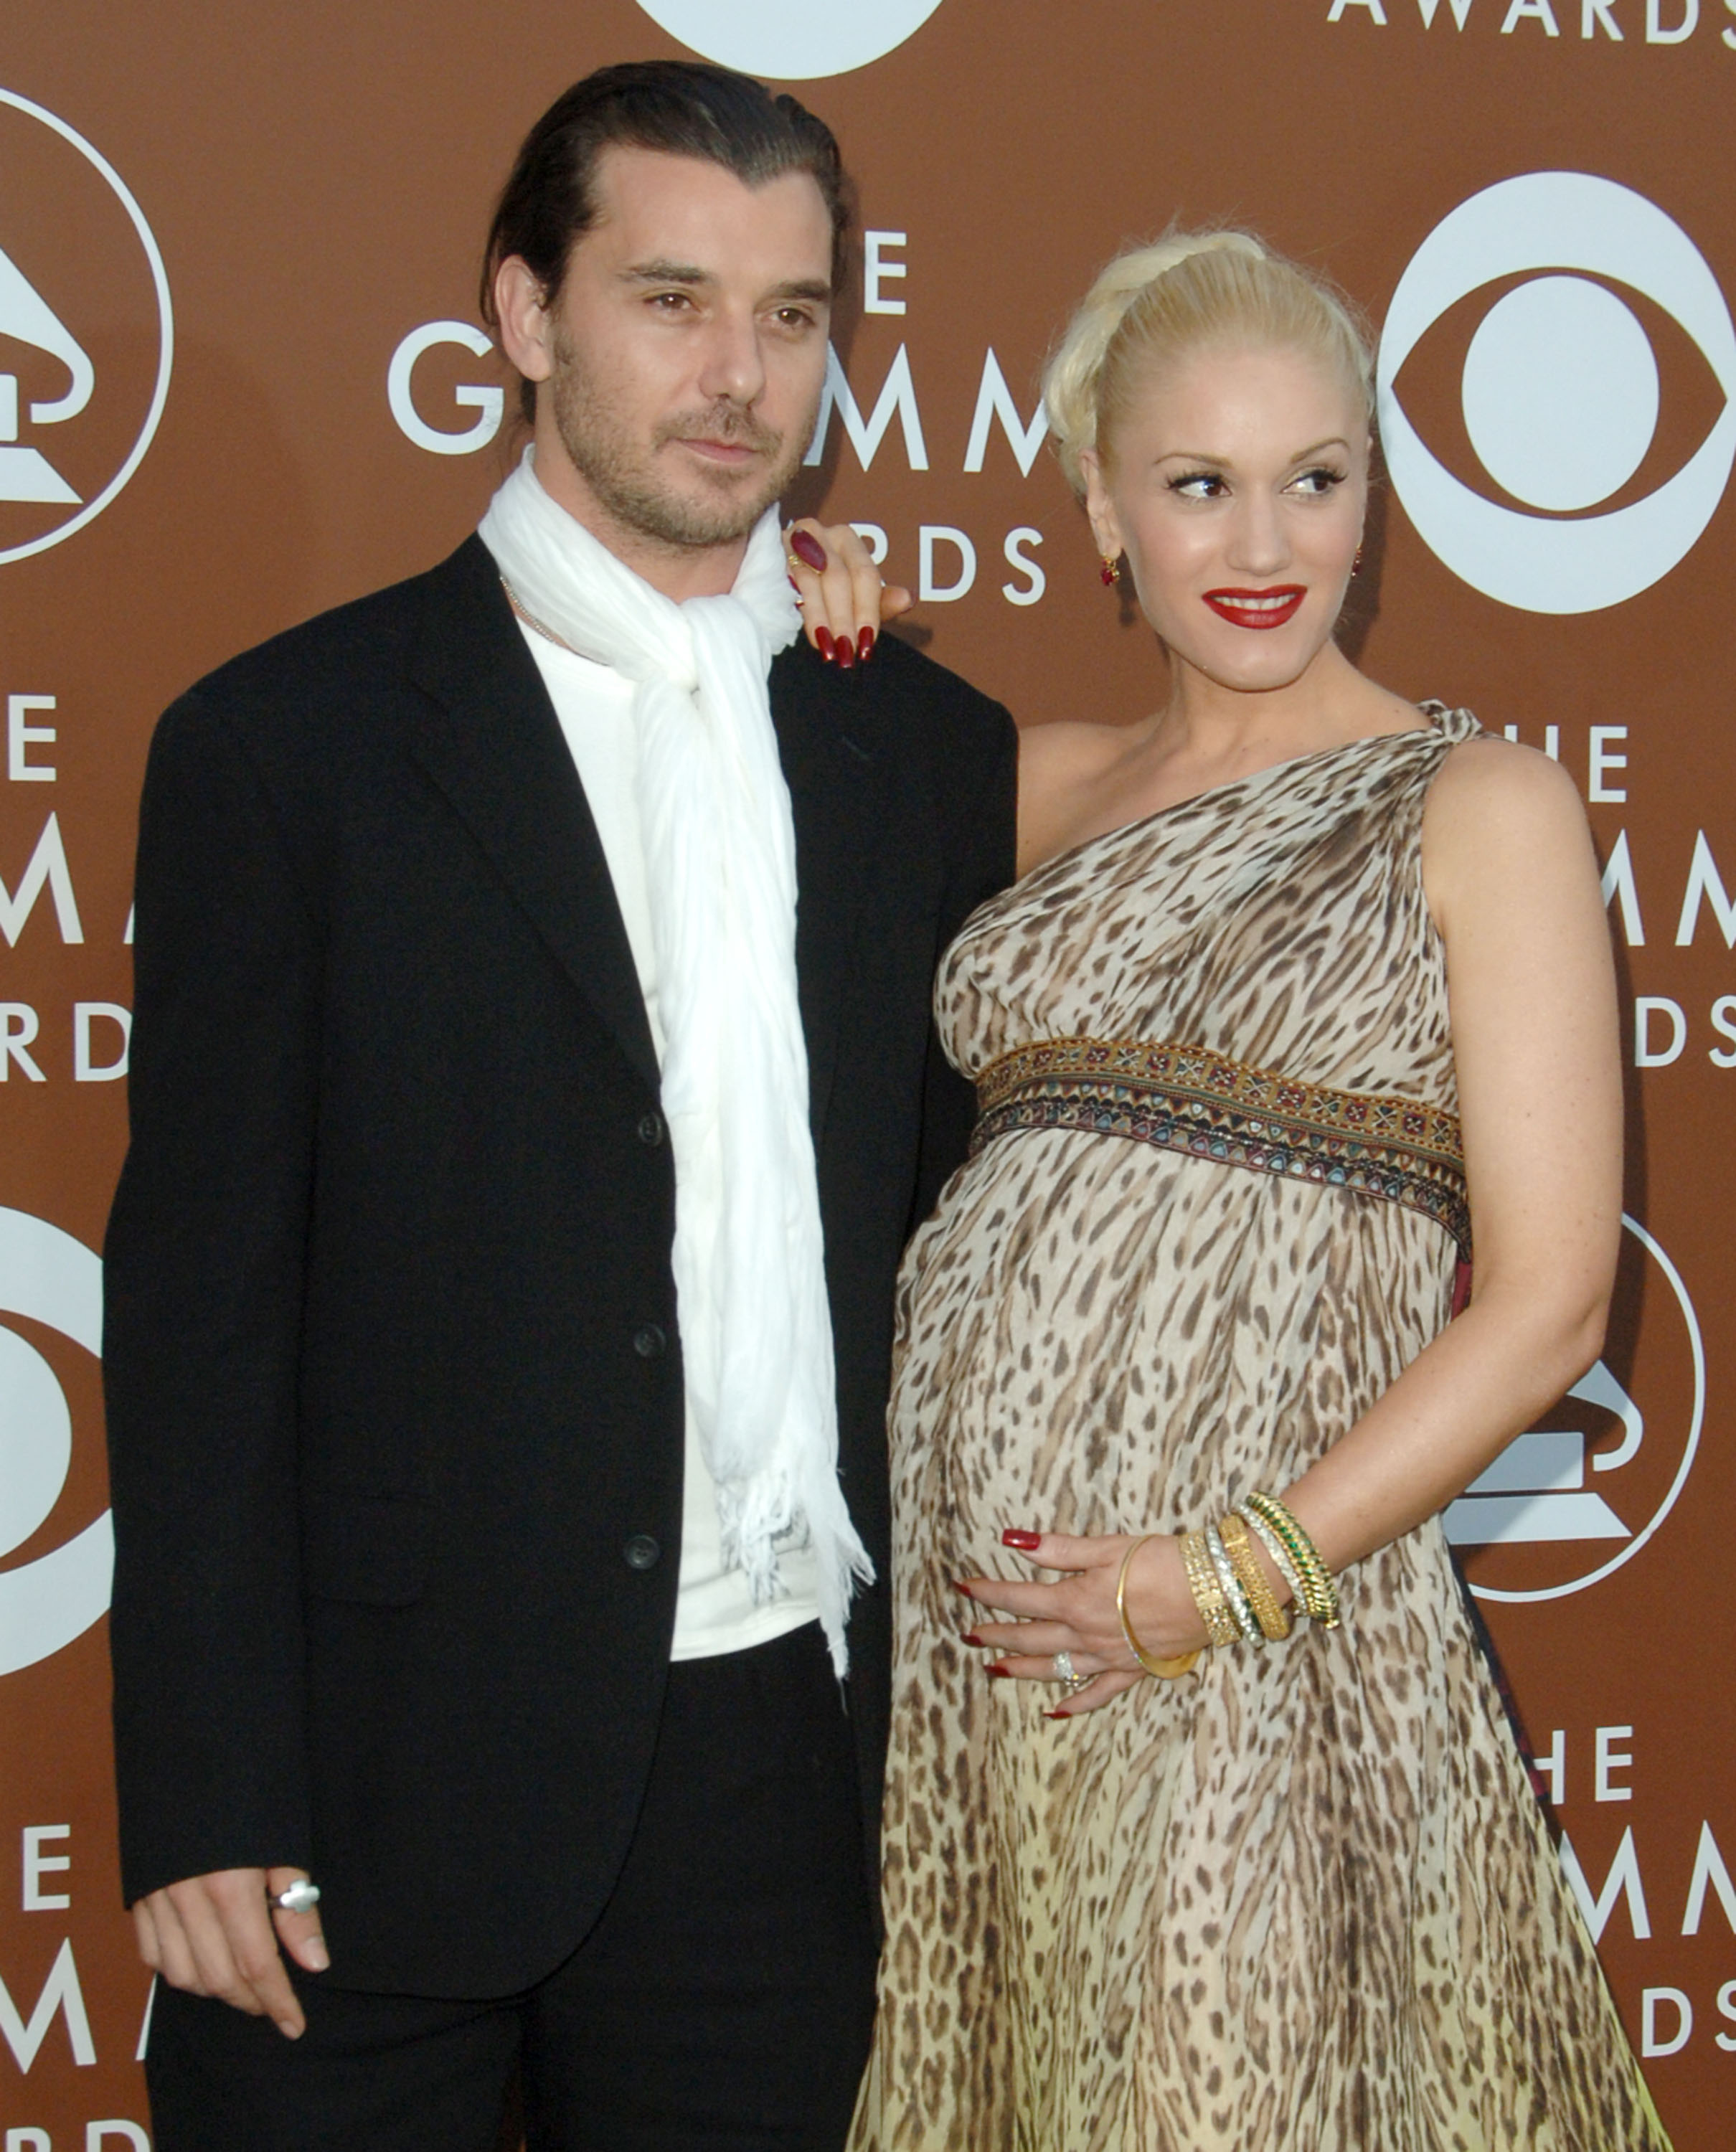 Gavin Rossdale and Gwen Stefani during the 48th Annual GRAMMY Awards on February 8, 2006 in Los Angeles, California | Source: Getty Images